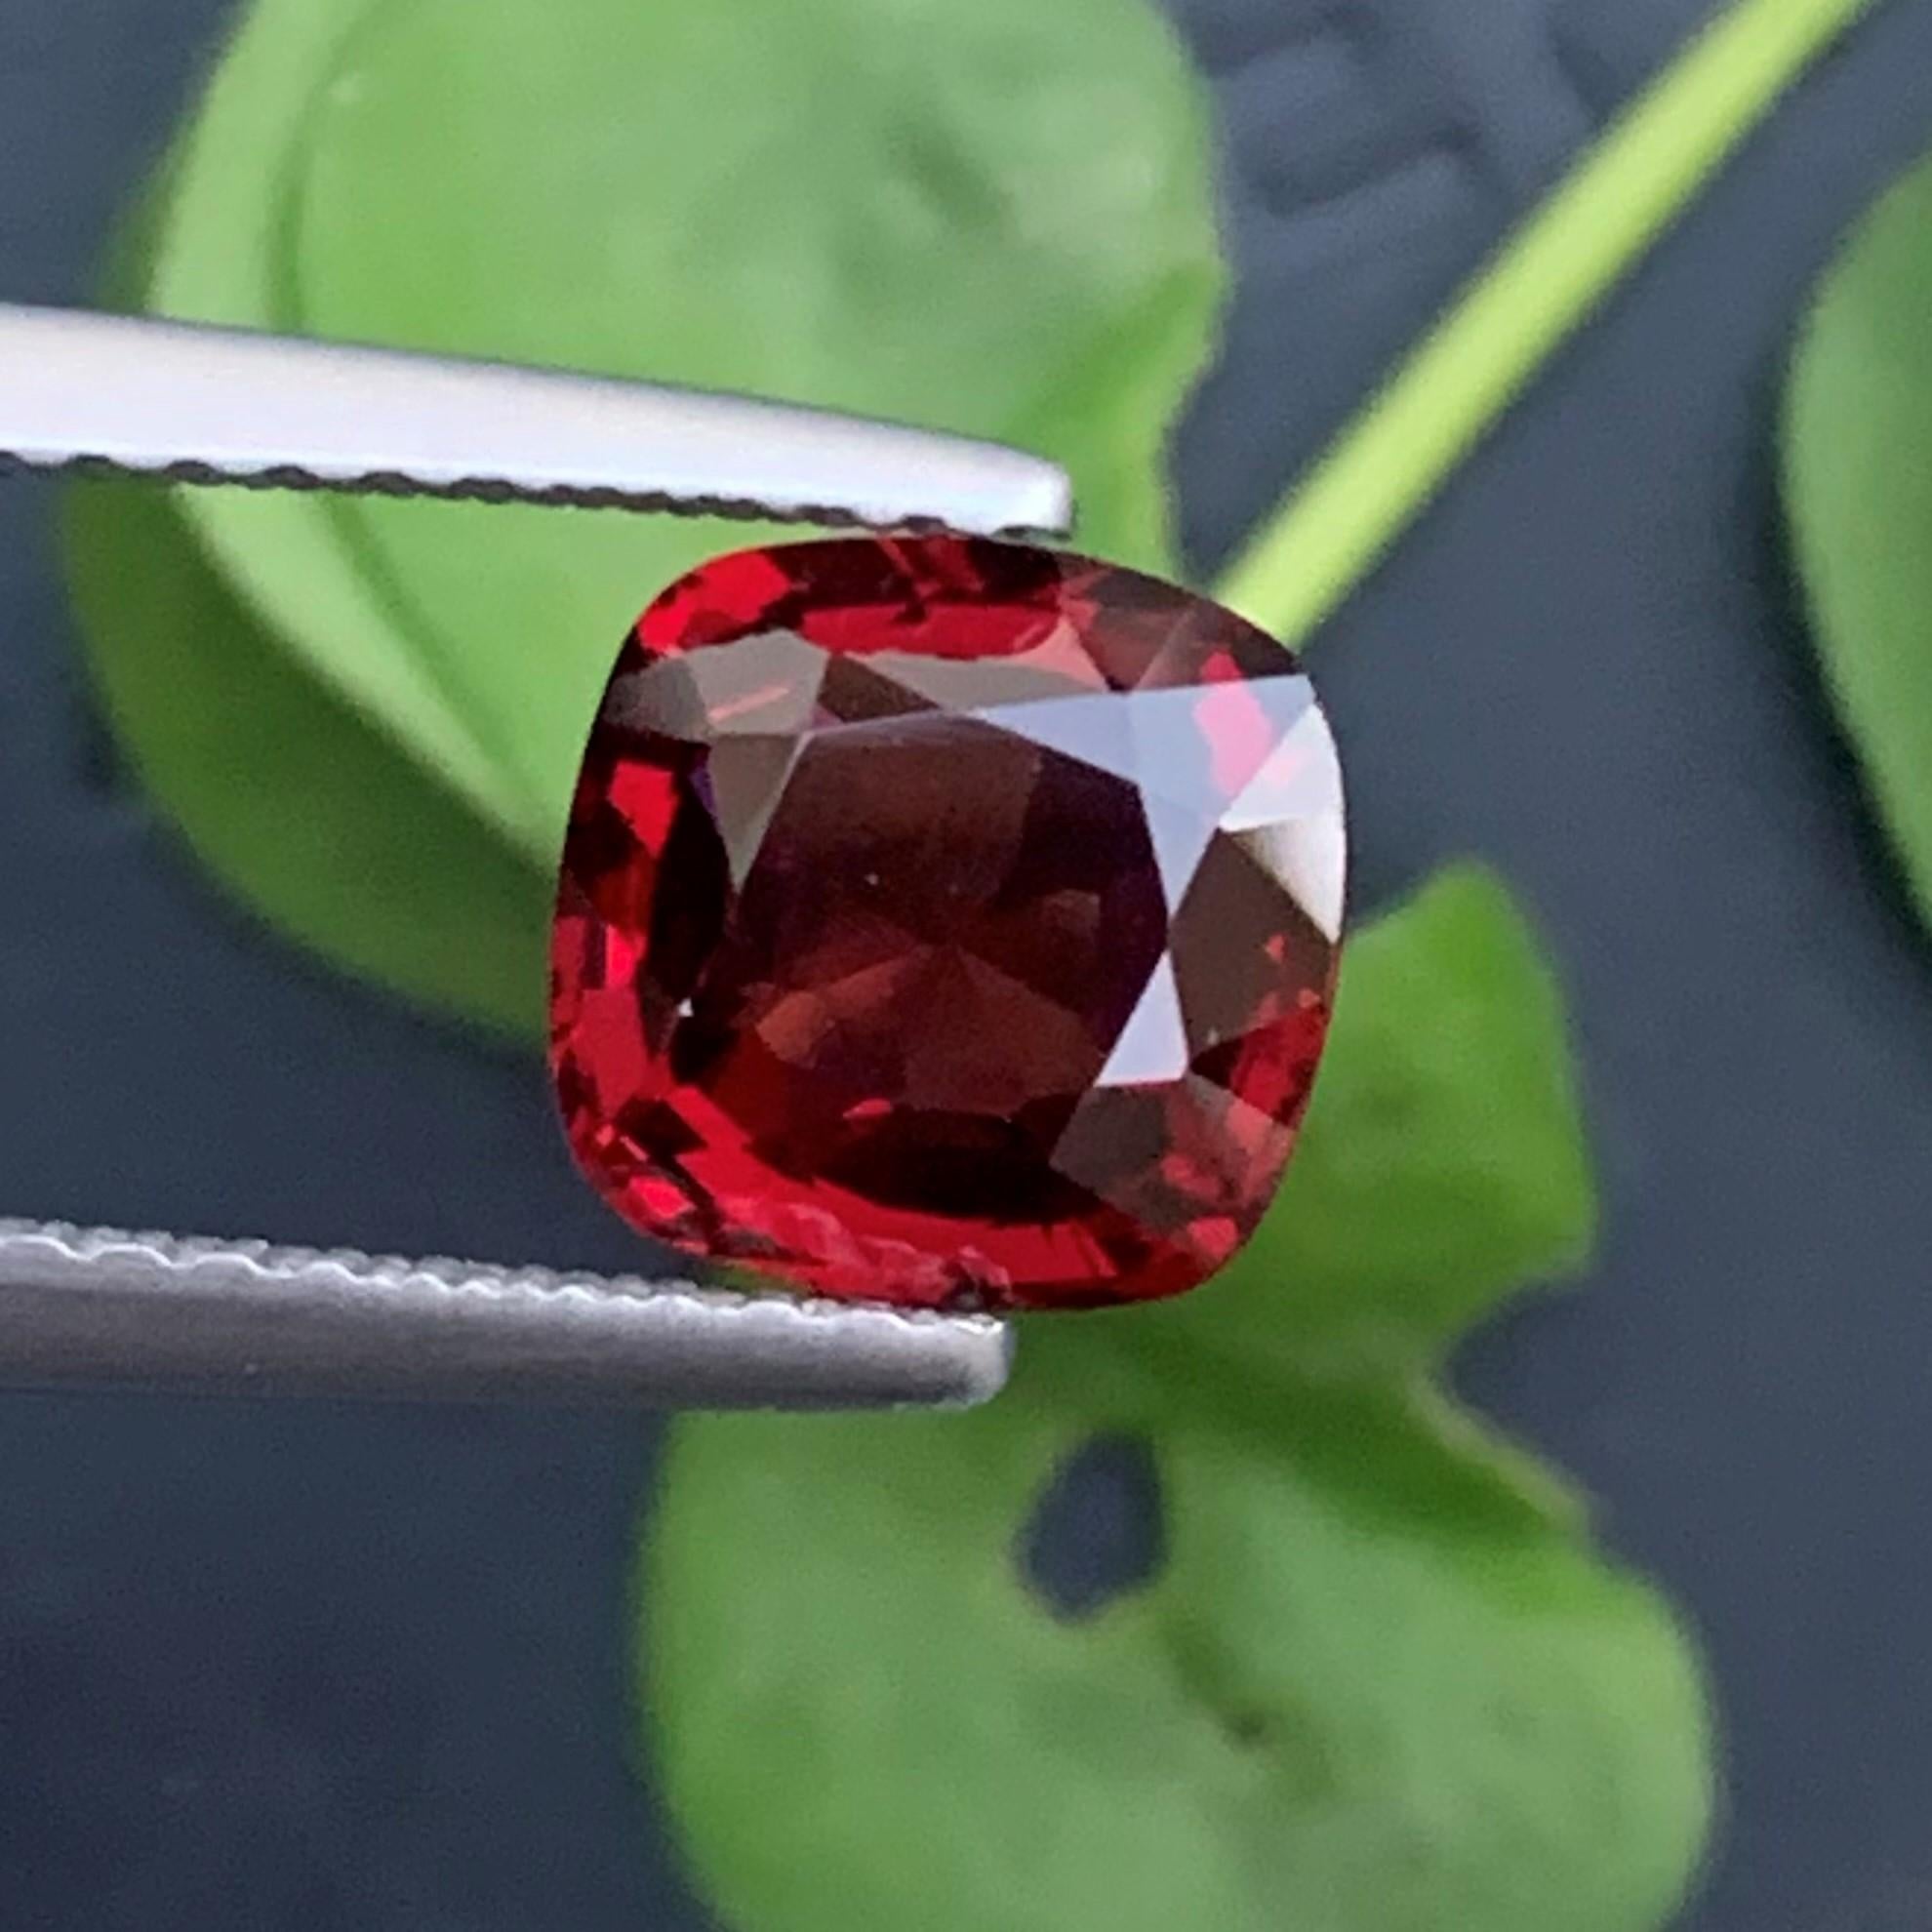 Faceted Red Spinel
Weight: 1.60 Carats
Dimension: 6.8x6.9x4 Mm
Origin: Burma Myanmar
Shape: Cushion
Color: Red
Treatment: Non / Natural
Certificate: On Demand
.
The red spinel gemstone is linked to the root chakra and is beneficial in boosting